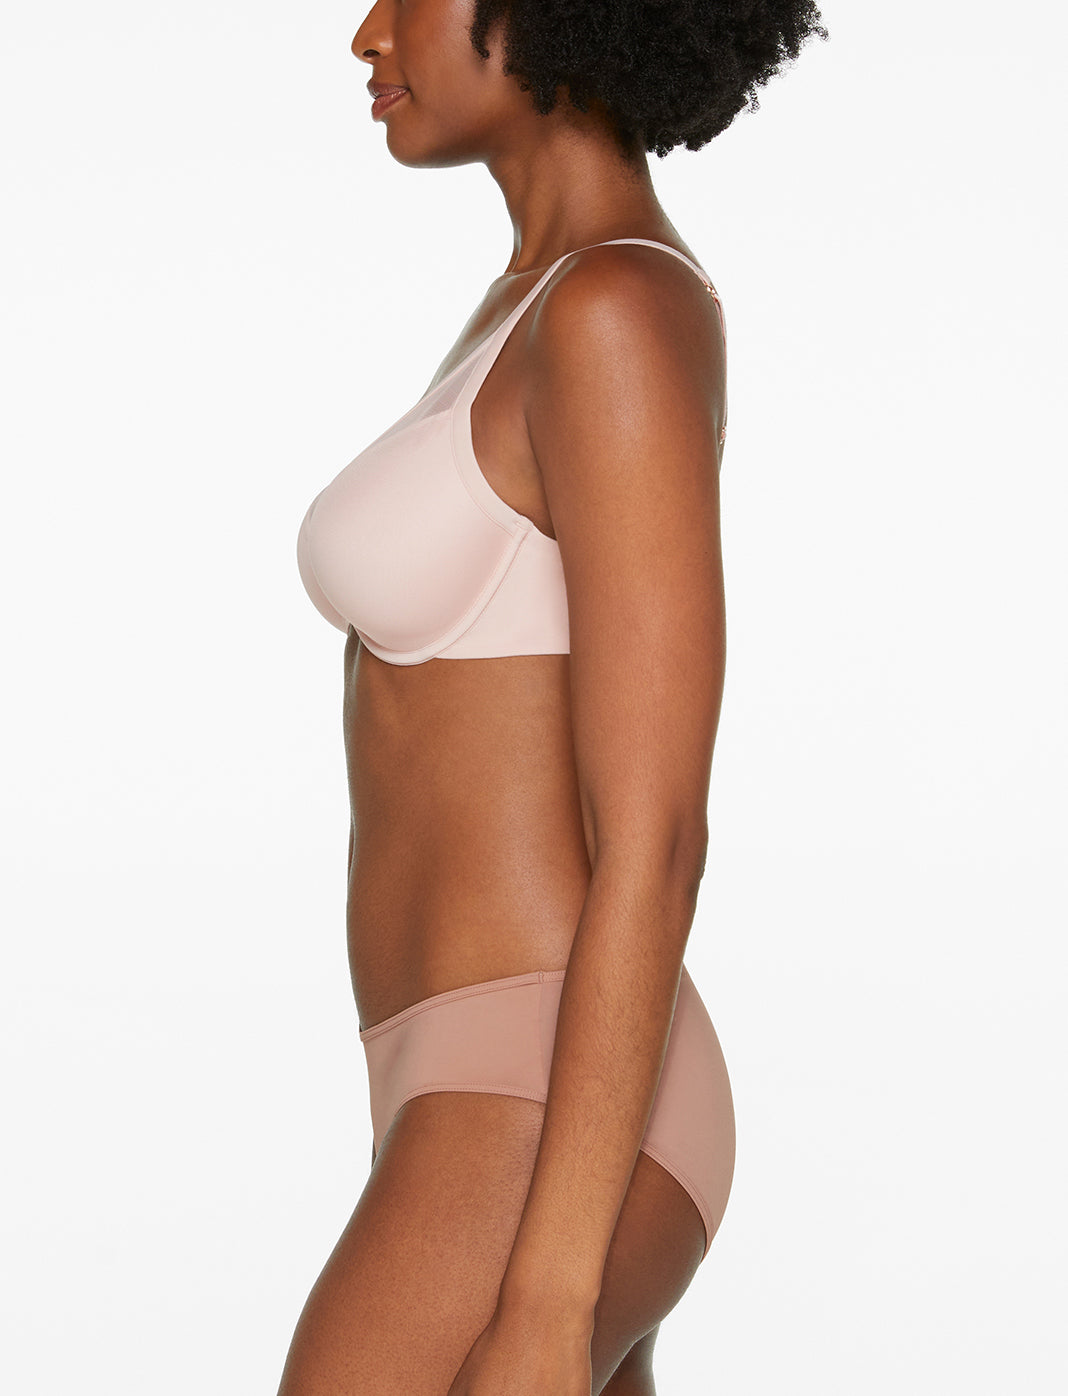 Thirdlove ⬇️ Full Figure Nude Nude 24/7 Classic Contour Plunge Bra Size 32H  Tan - $27 (62% Off Retail) - From MCI